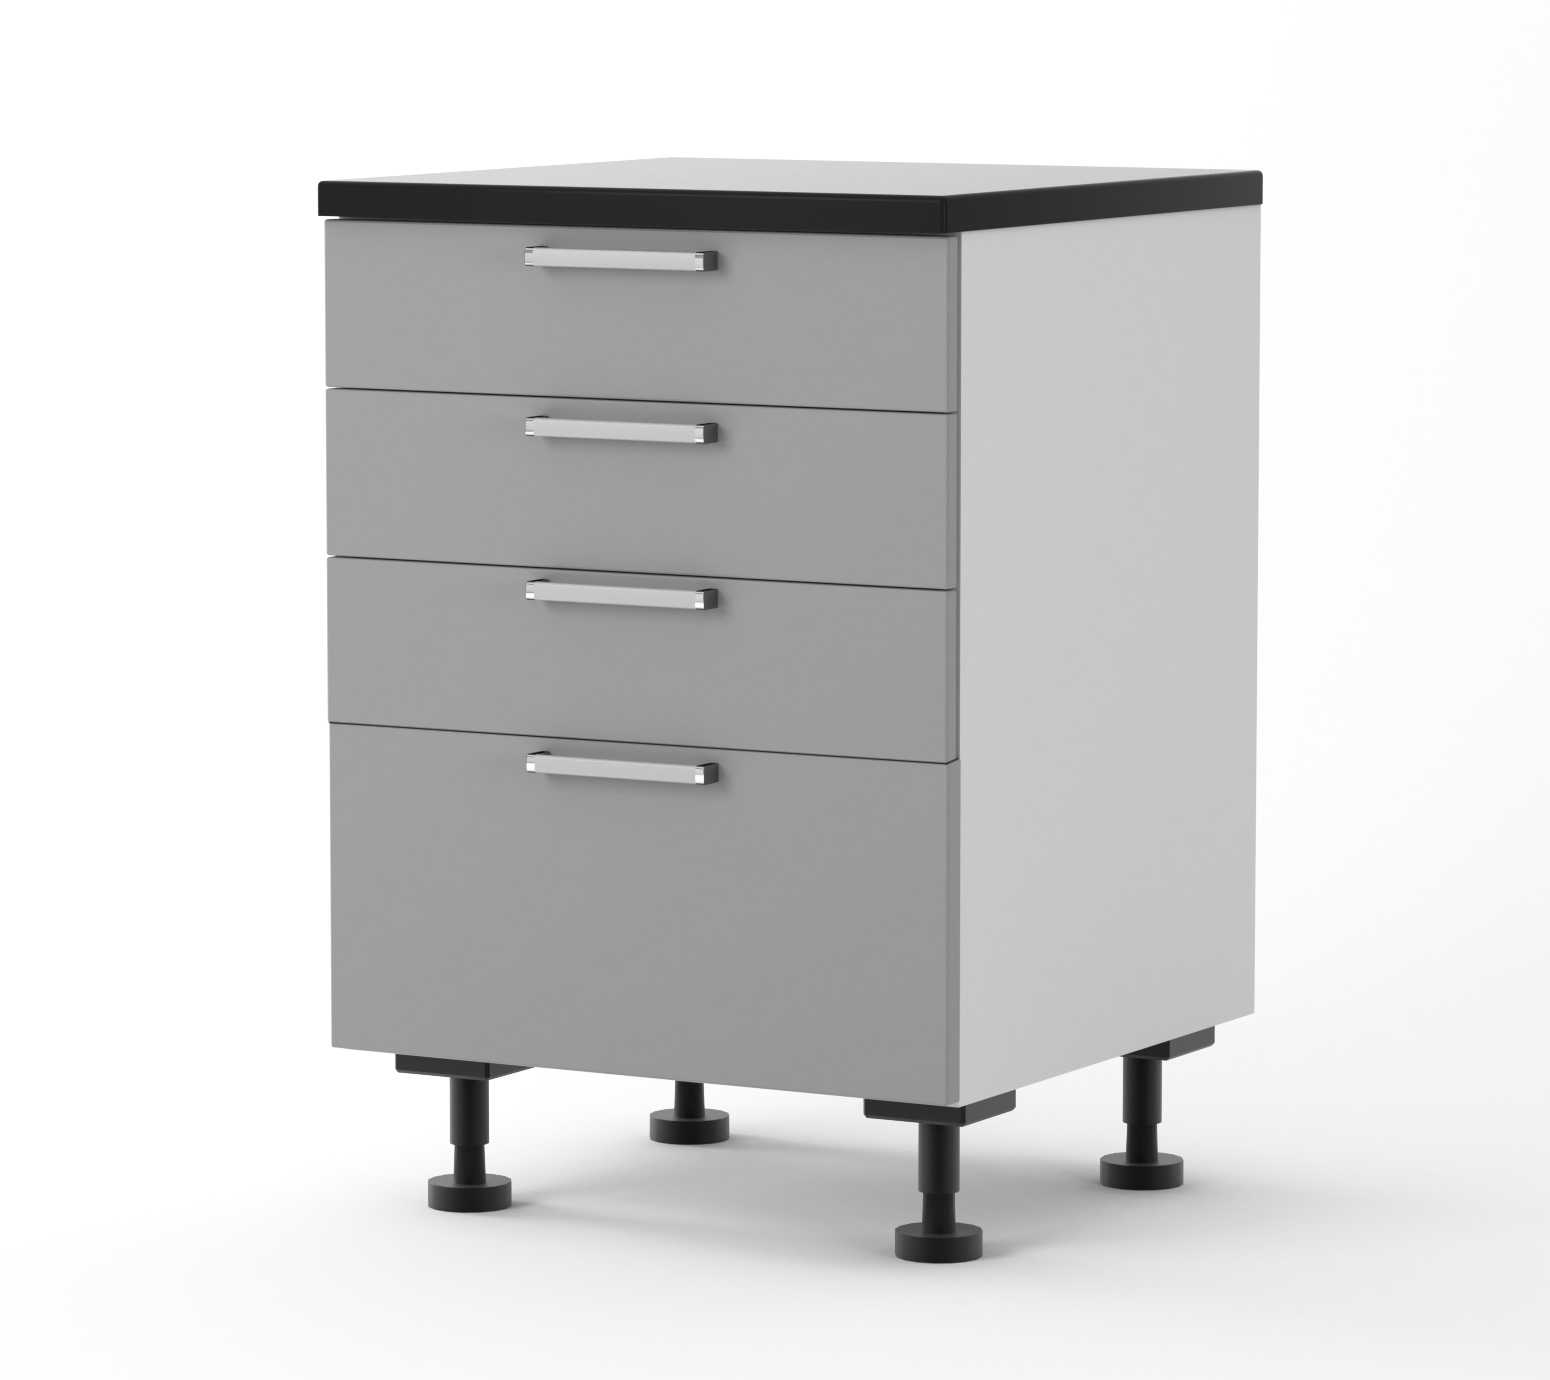 Athens - 600mm wide Four Drawer Base Cabinet